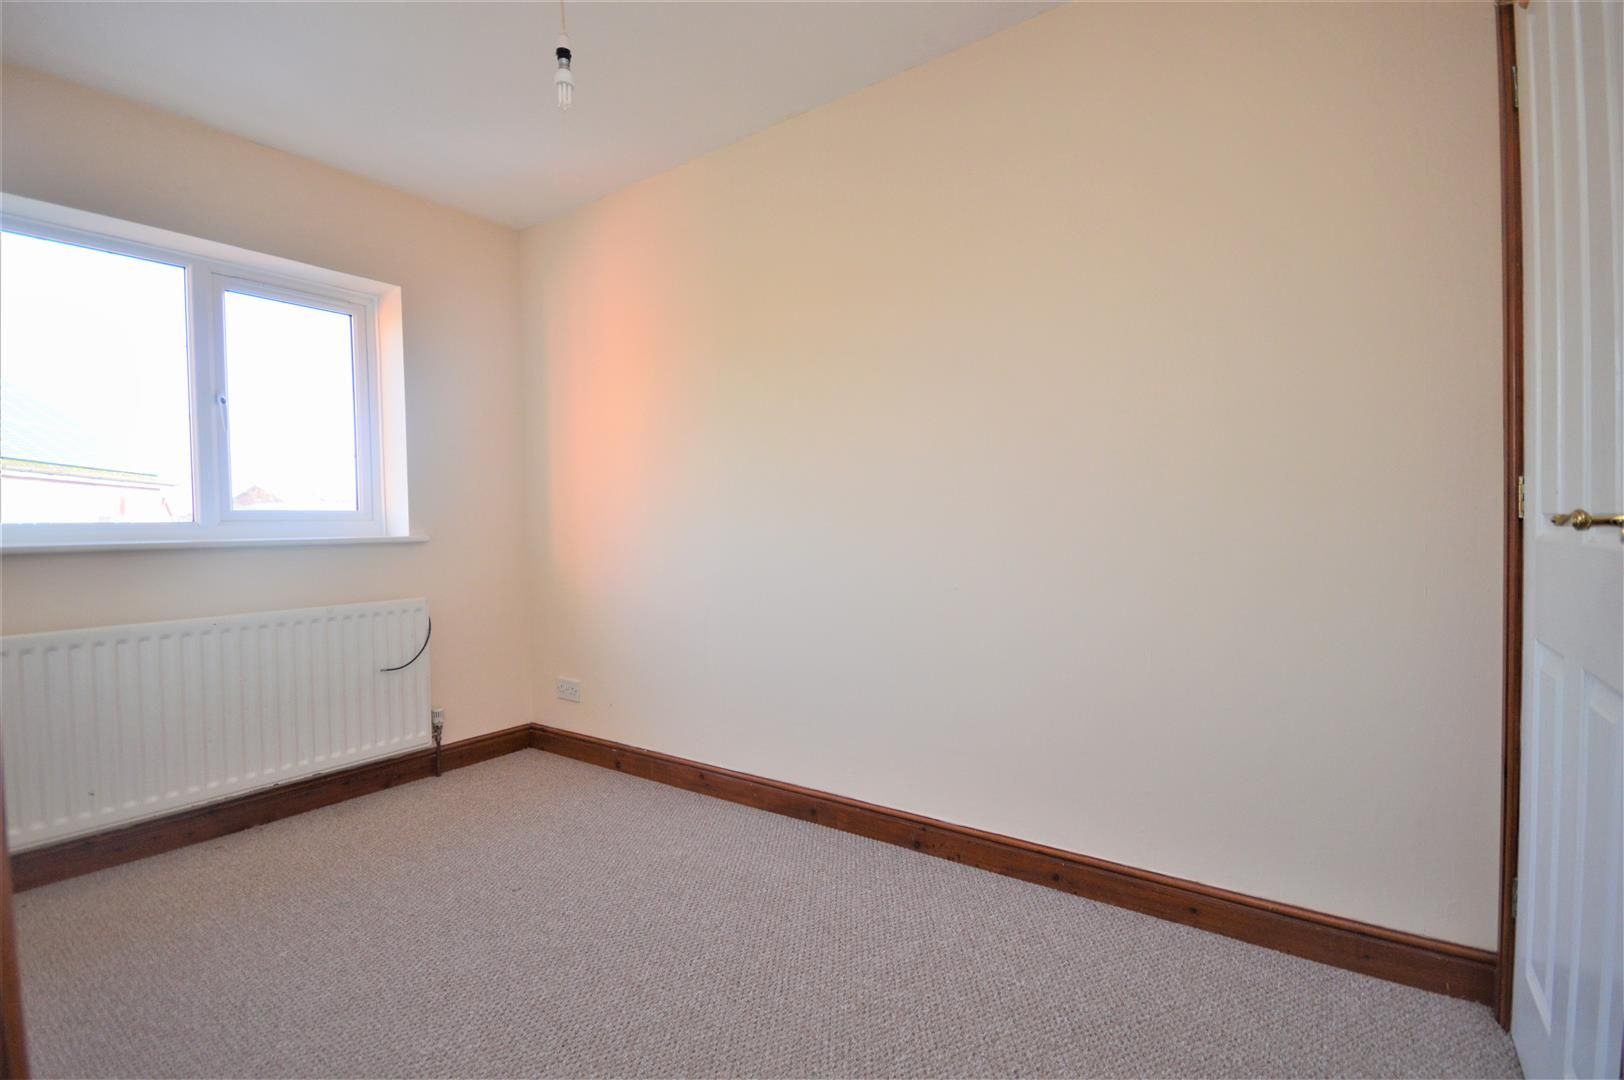 2 bed terraced for sale in Lower Bullingham  - Property Image 8